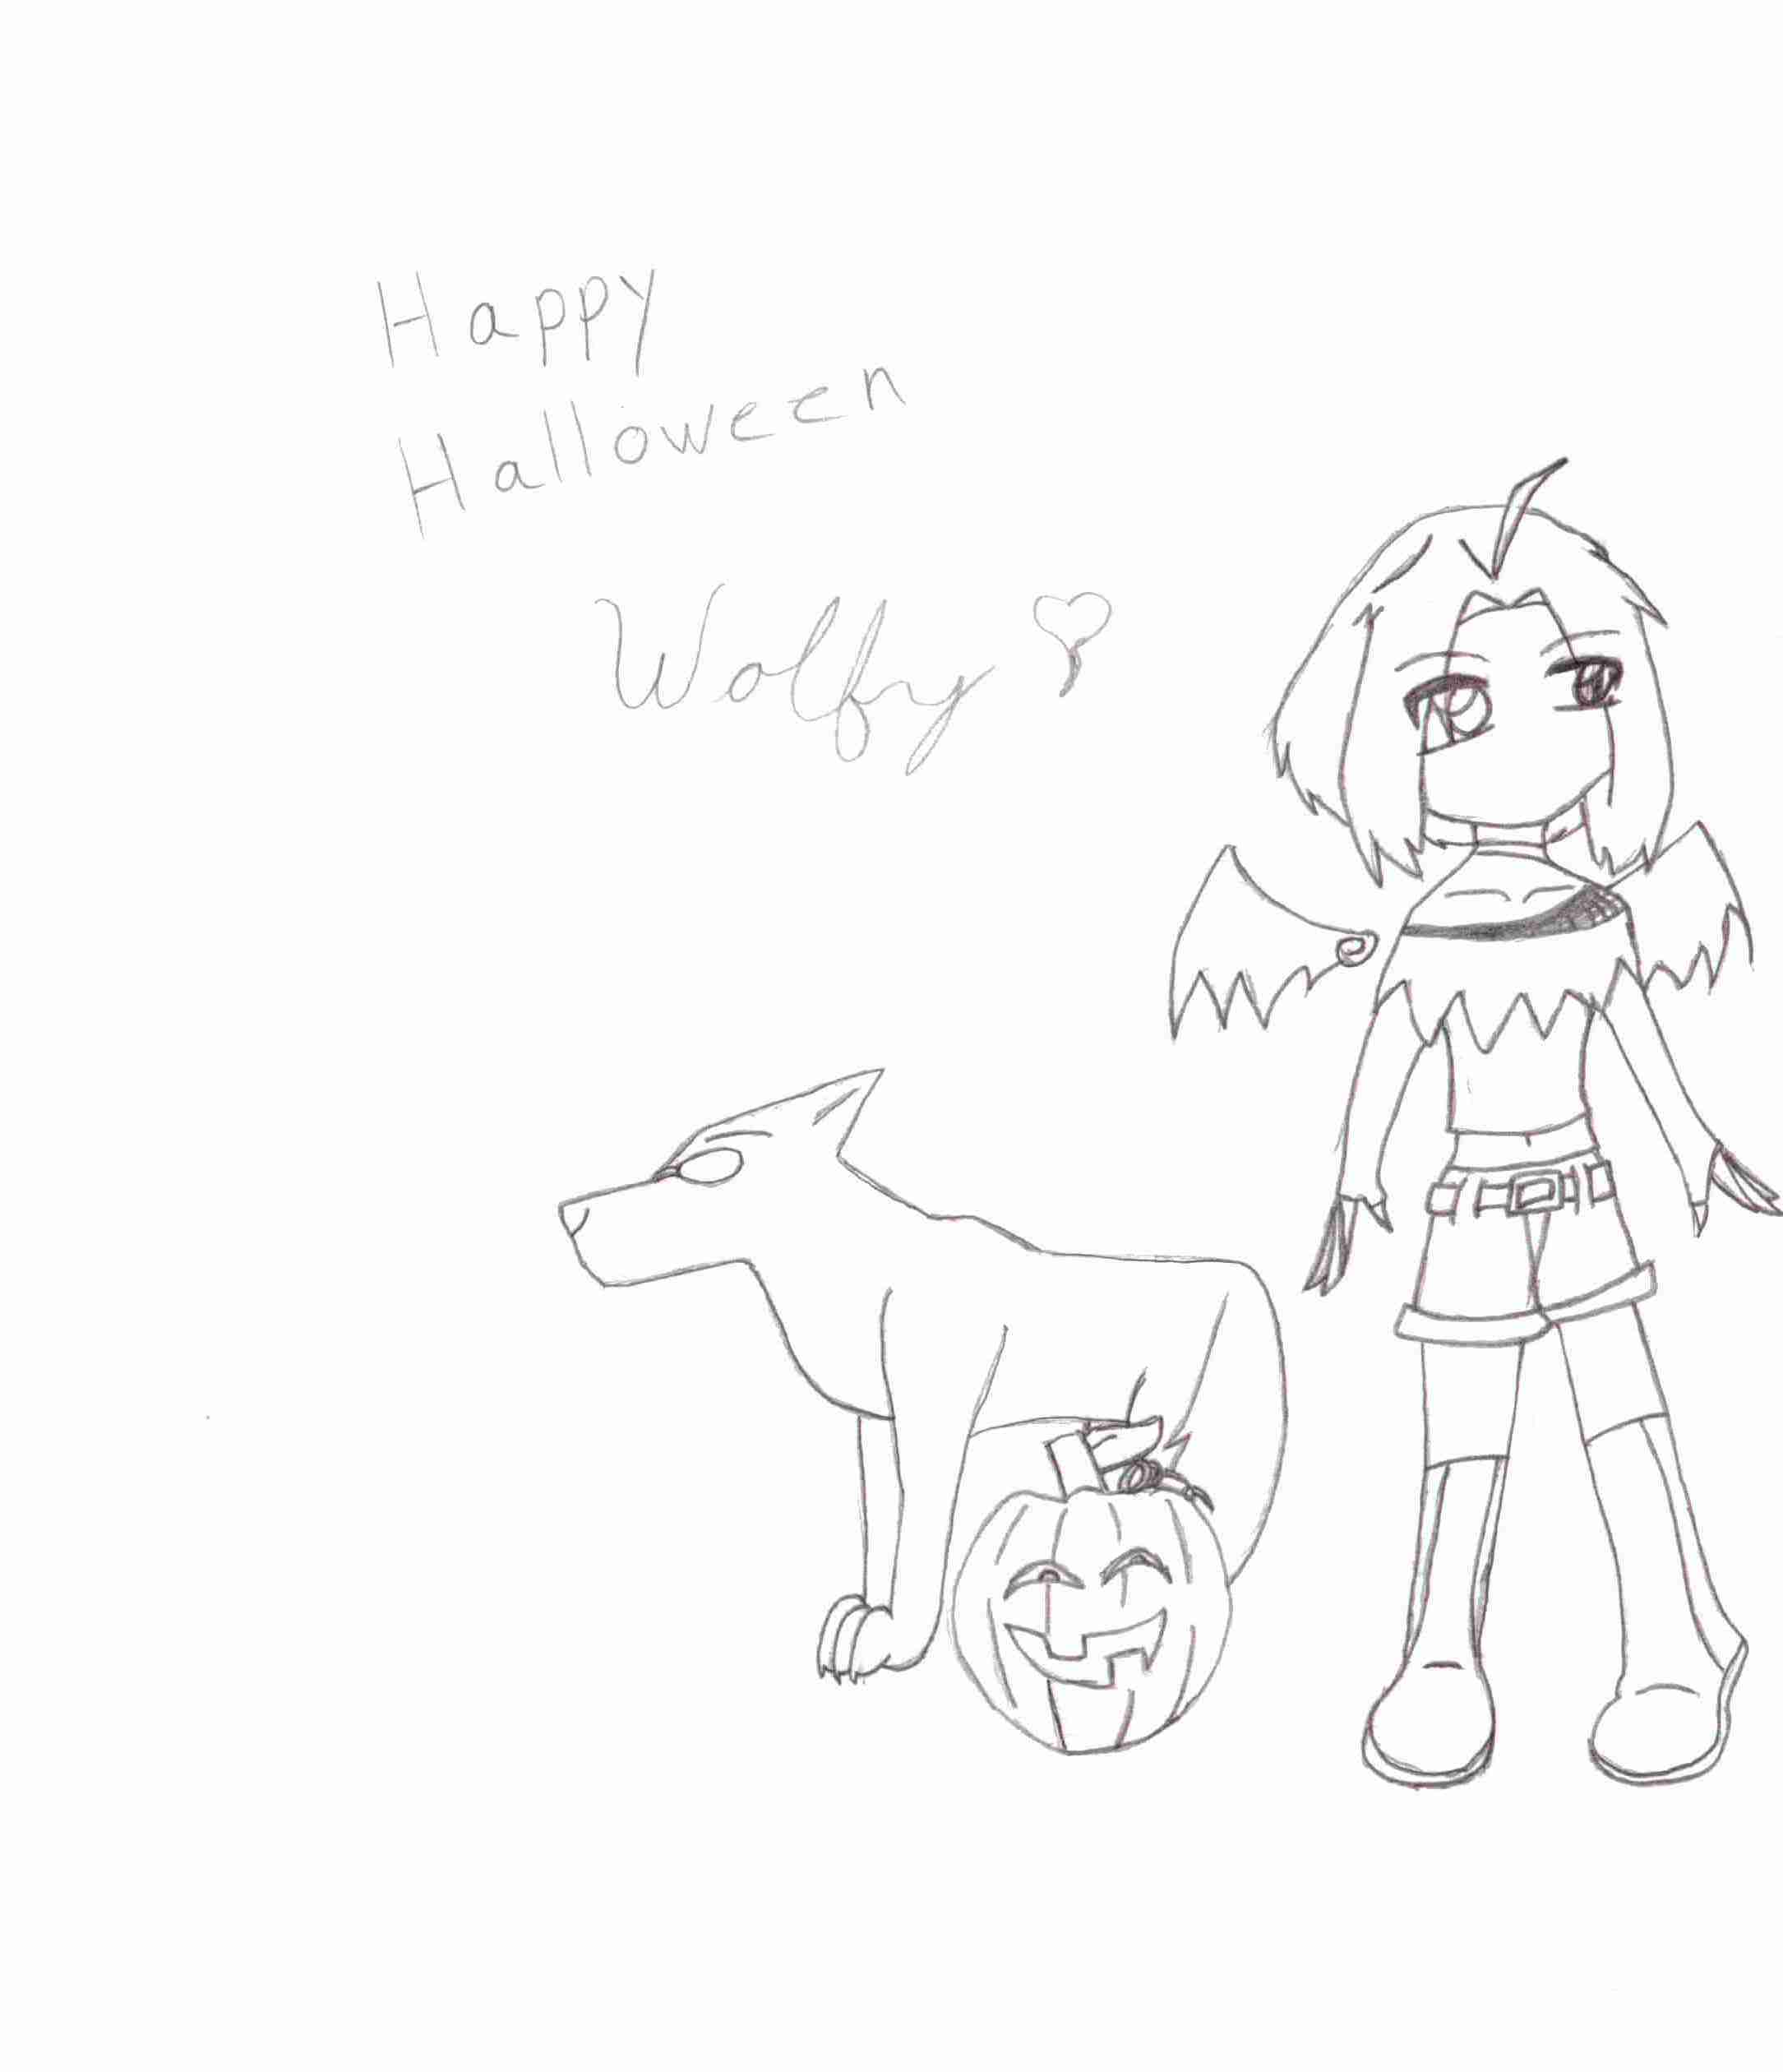 Hhappy Holloween with Wolfychan by Wolfychan